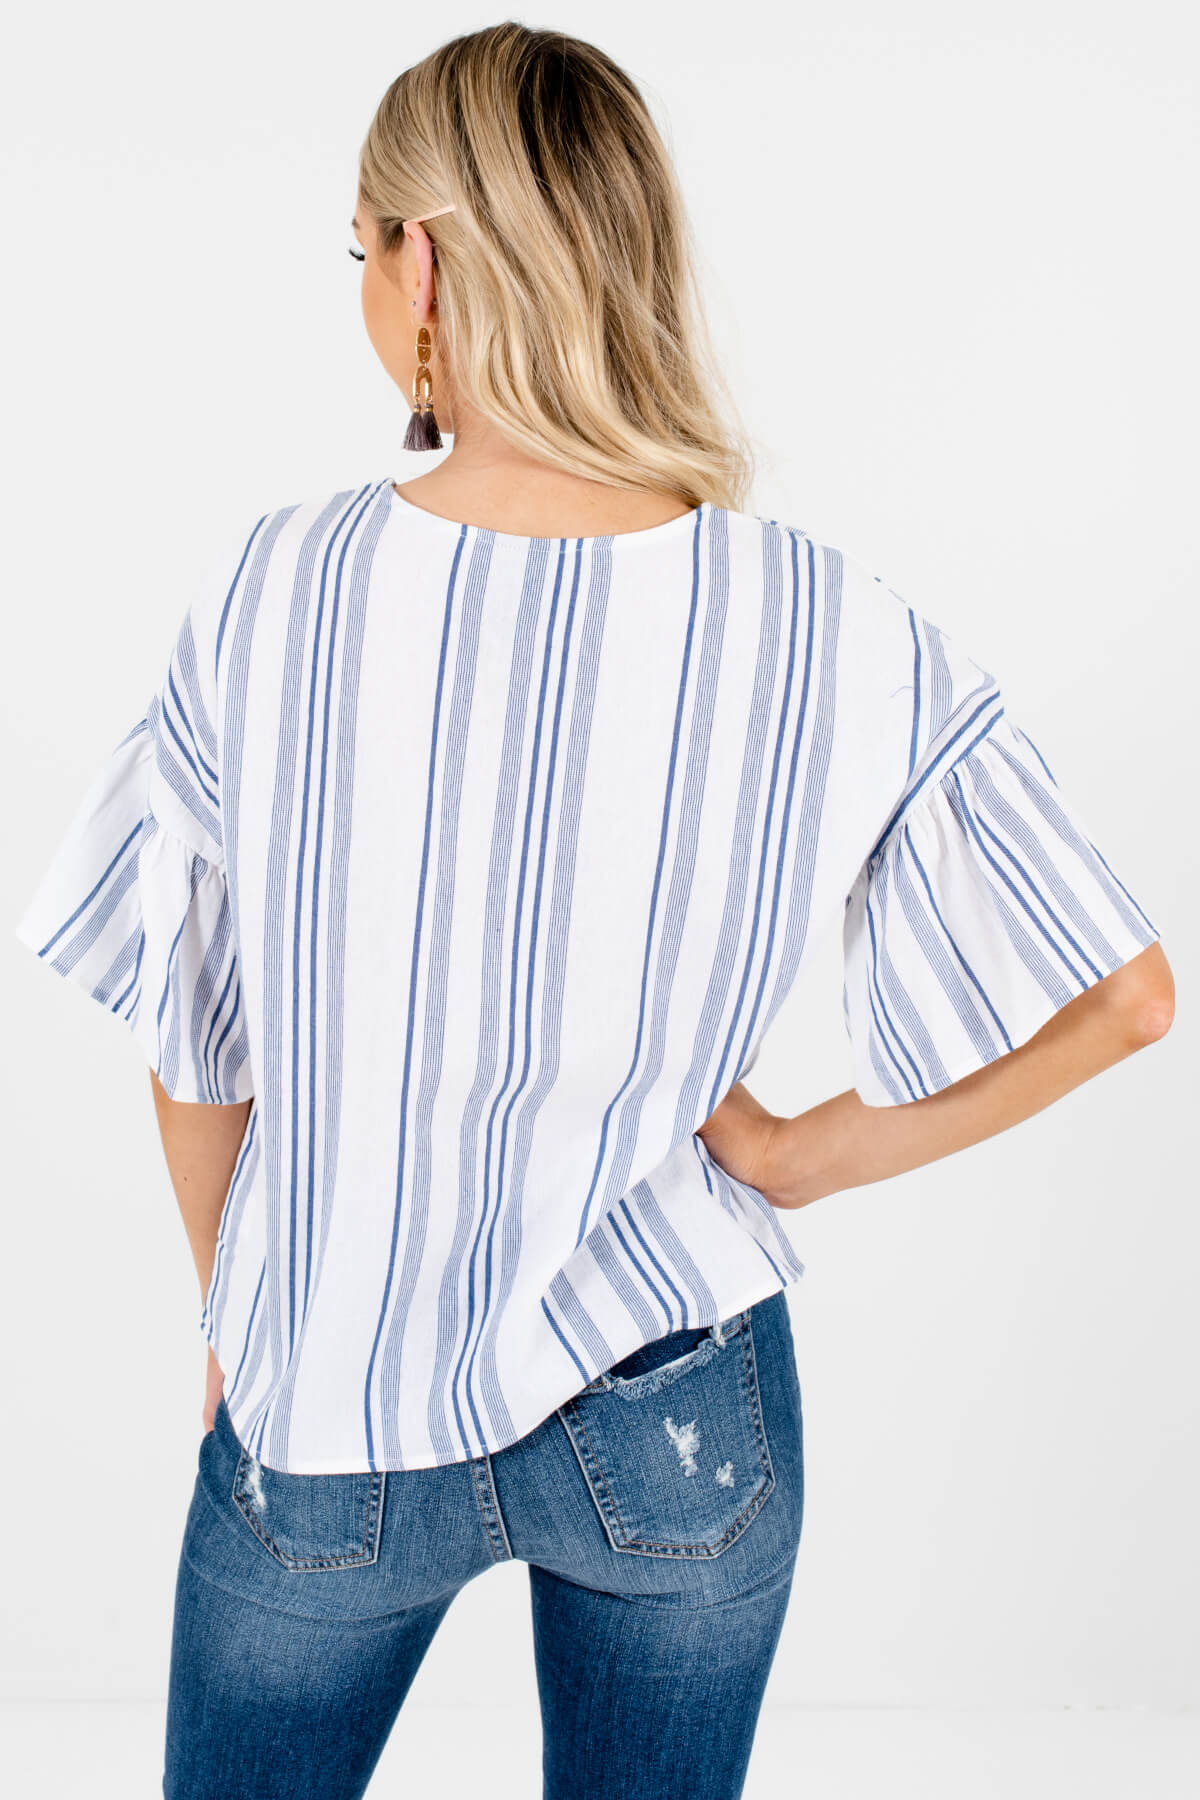 White Blue Striped Petite Tops Affordable Online Boutique